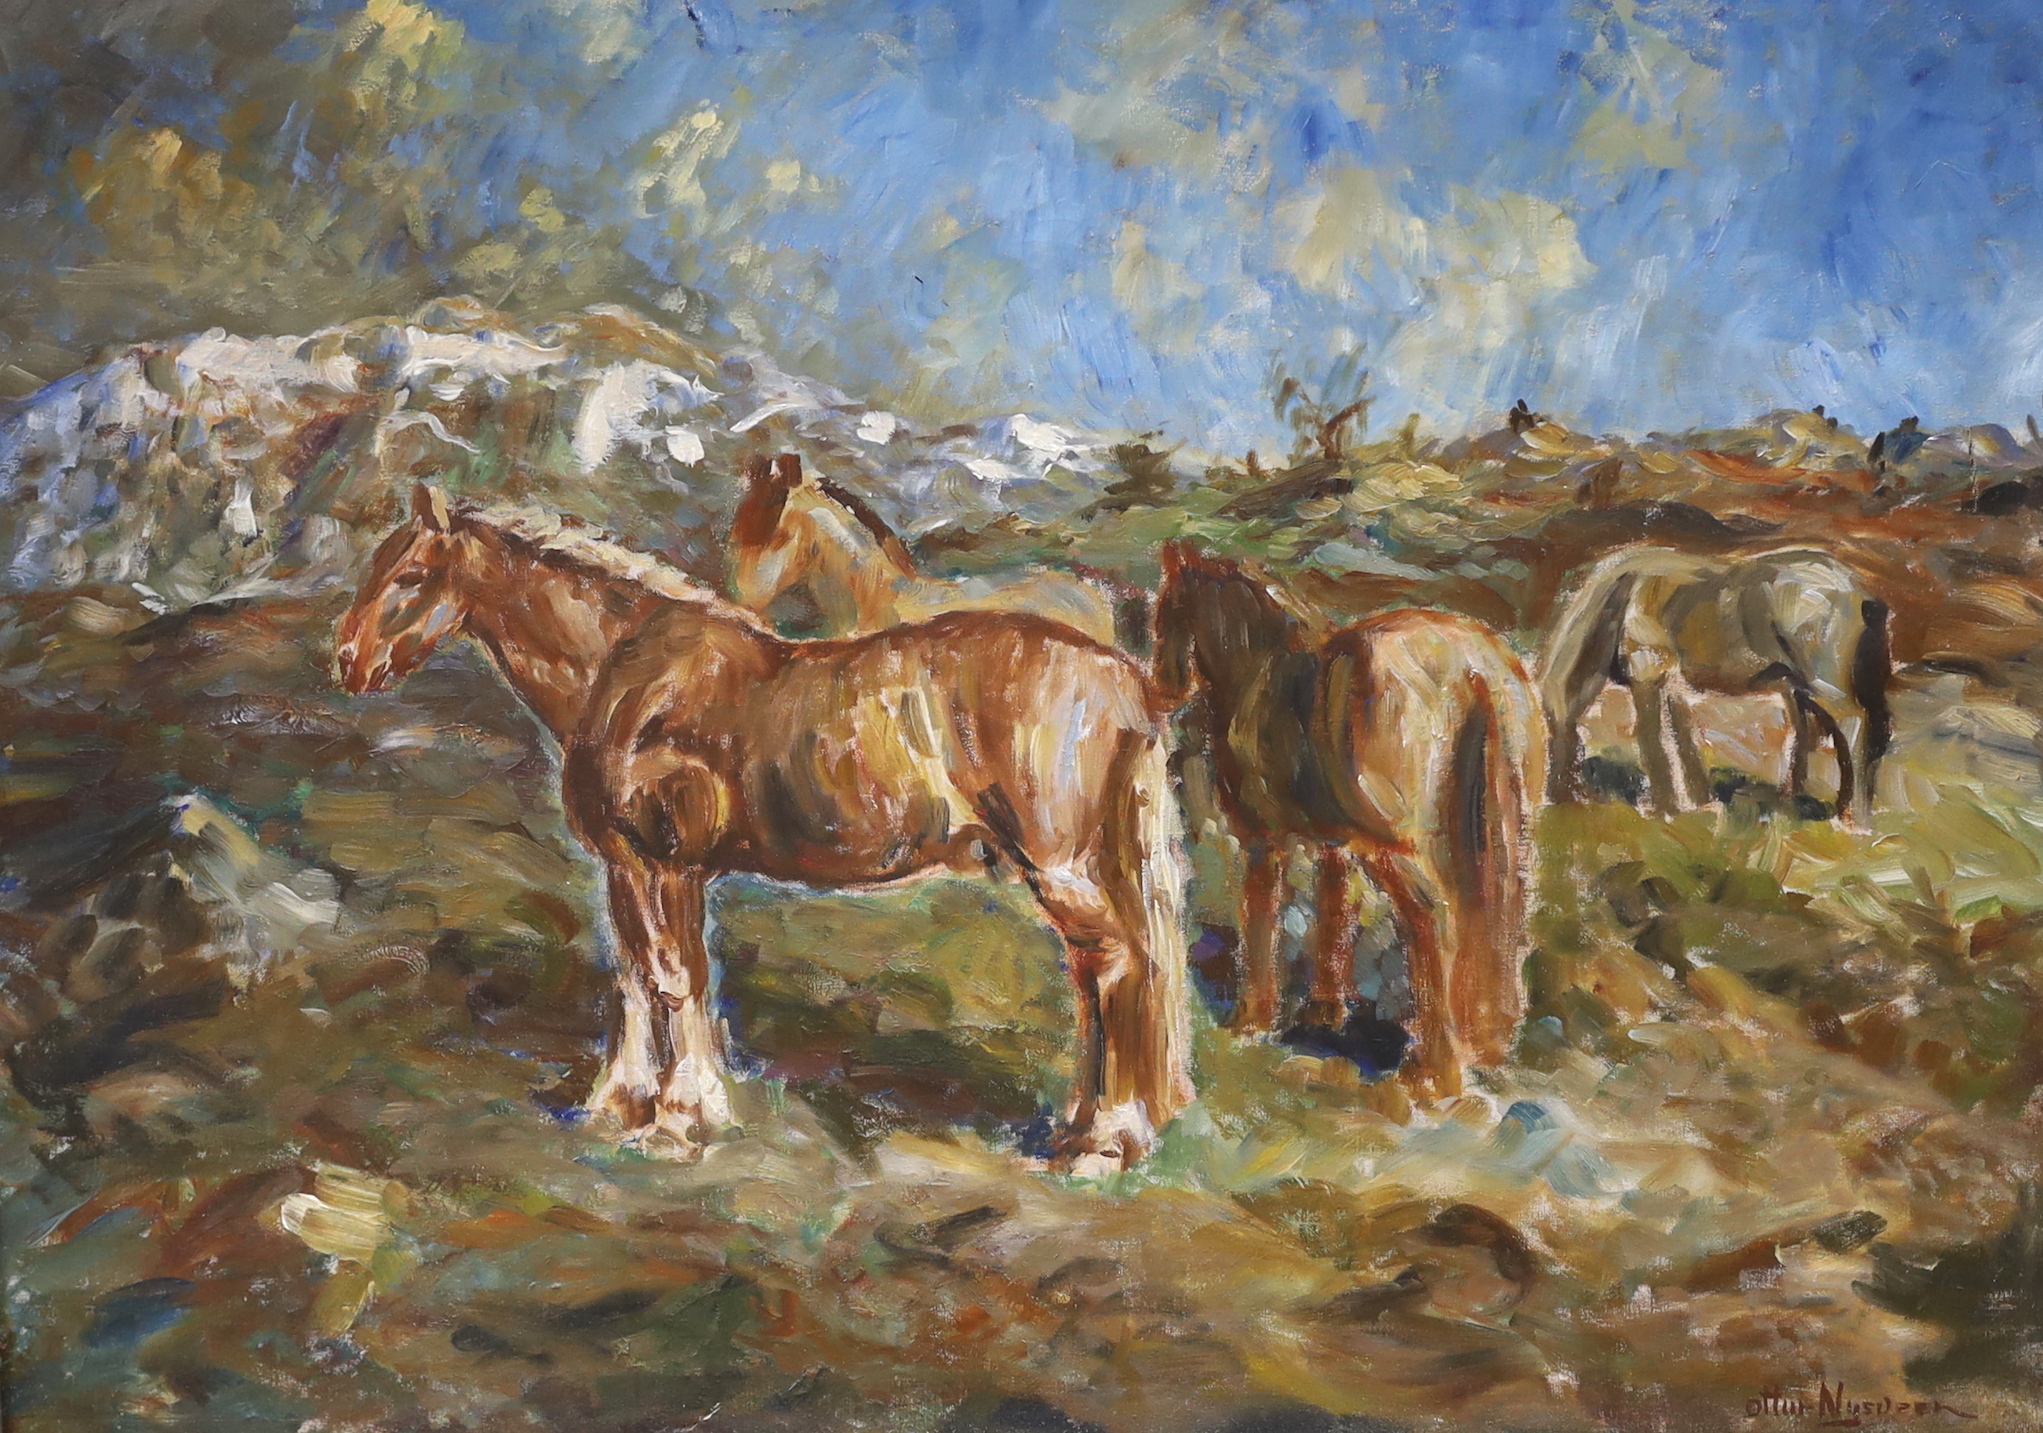 Ottur Nys- - - - (?), oil on canvas, 'Life without boundaries', ponies on a hillside, signed, 55 x 74cm